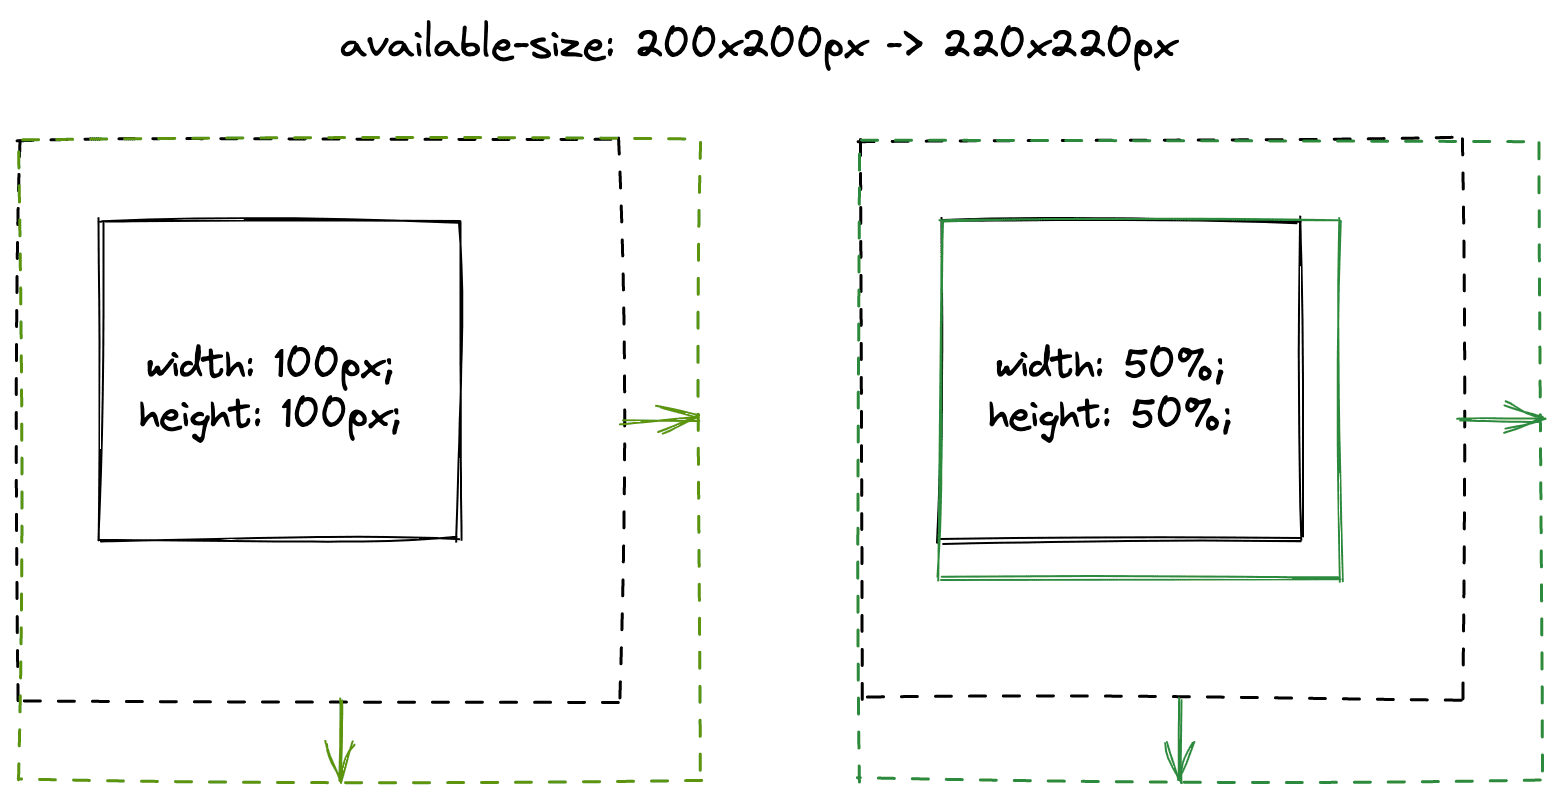 Comparing a fixed width and percentage width image.